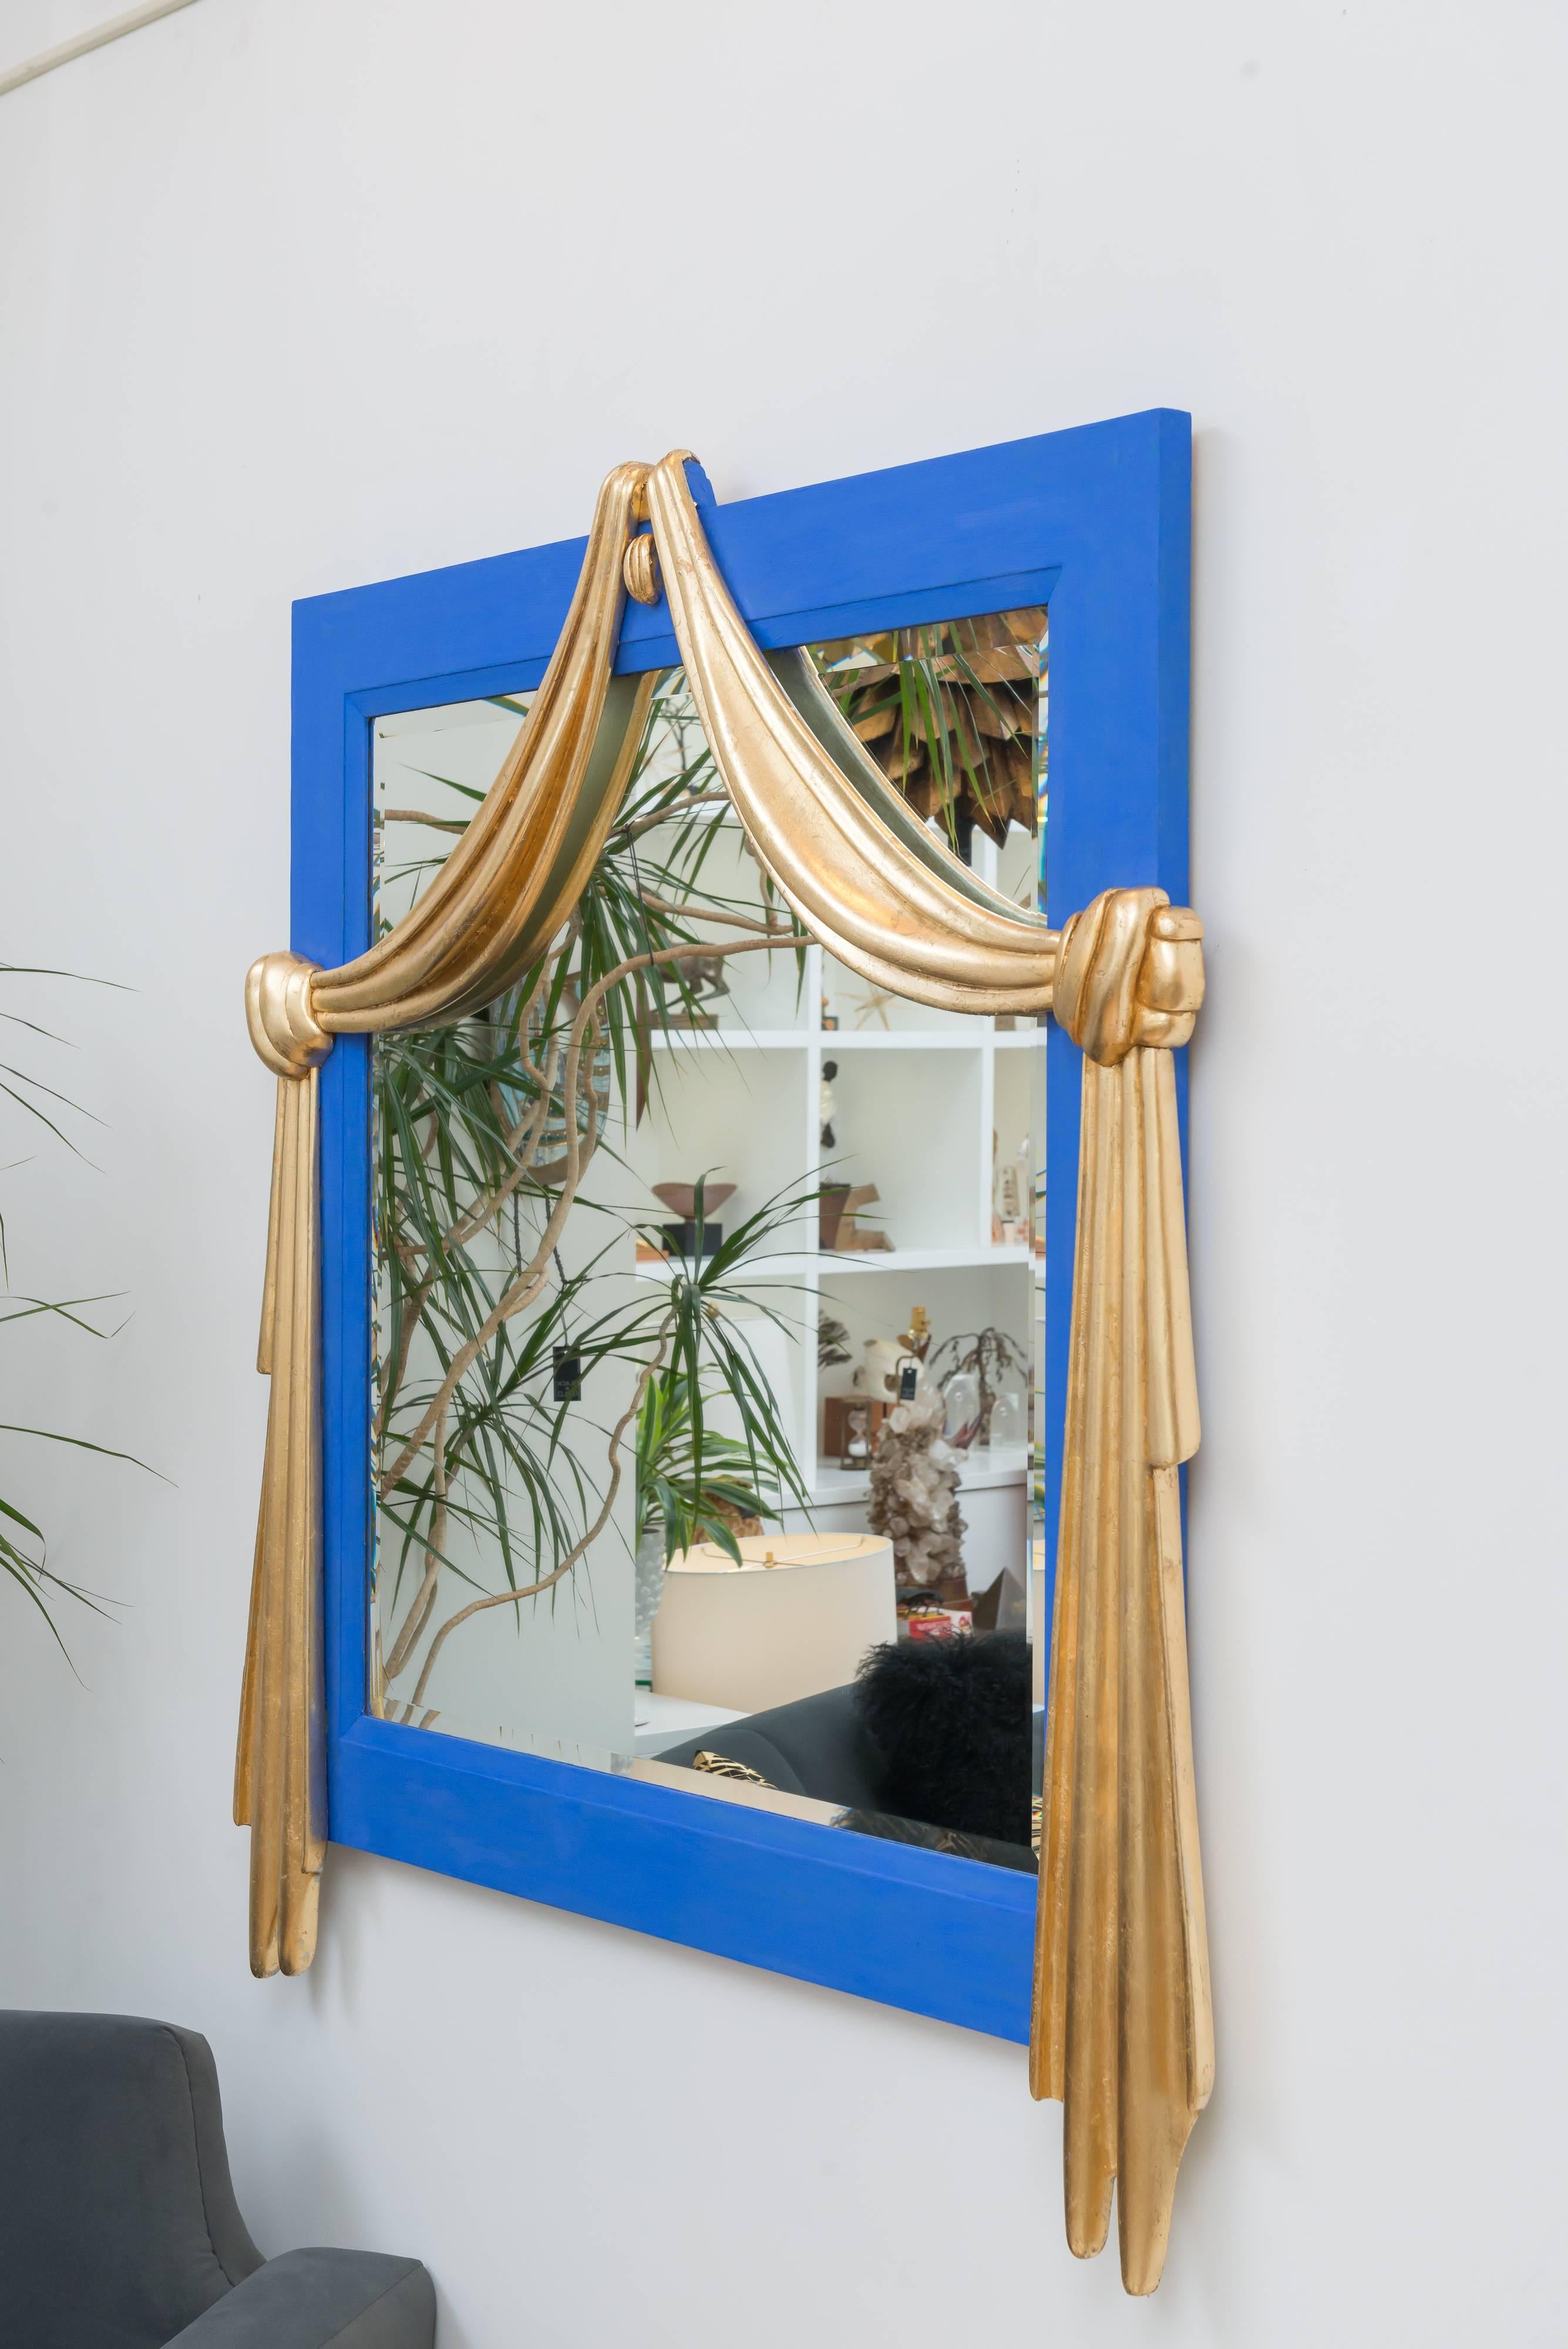 Large-scale mirror p that has been painted in a French flat blue paint with gilt draped detail.